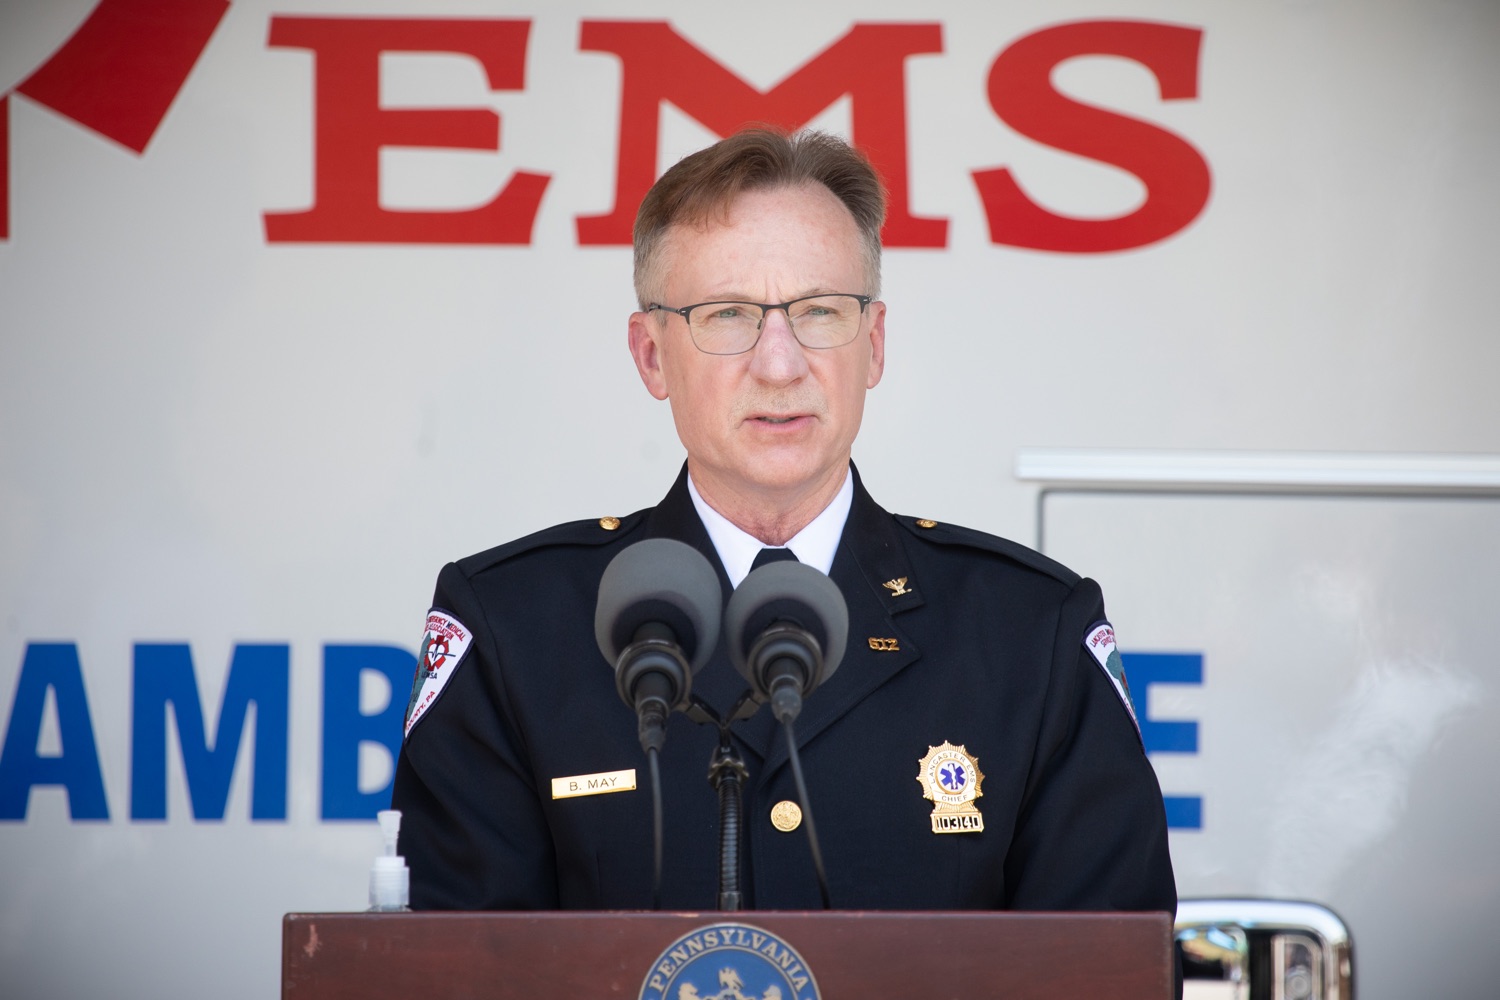 Bob May, Executive Director Lancaster EMS speaking to the press.  Governor Tom Wolf visited the Millersville location of Lancaster EMS today to thank first responders and learn about how they are adapting their critical work during the states response to the COVID-19 pandemic.  Millersville, PA  July 30, 2020<br><a href="https://filesource.amperwave.net/commonwealthofpa/photo/18180_gov_first_responders_dz_013.jpg" target="_blank">⇣ Download Photo</a>